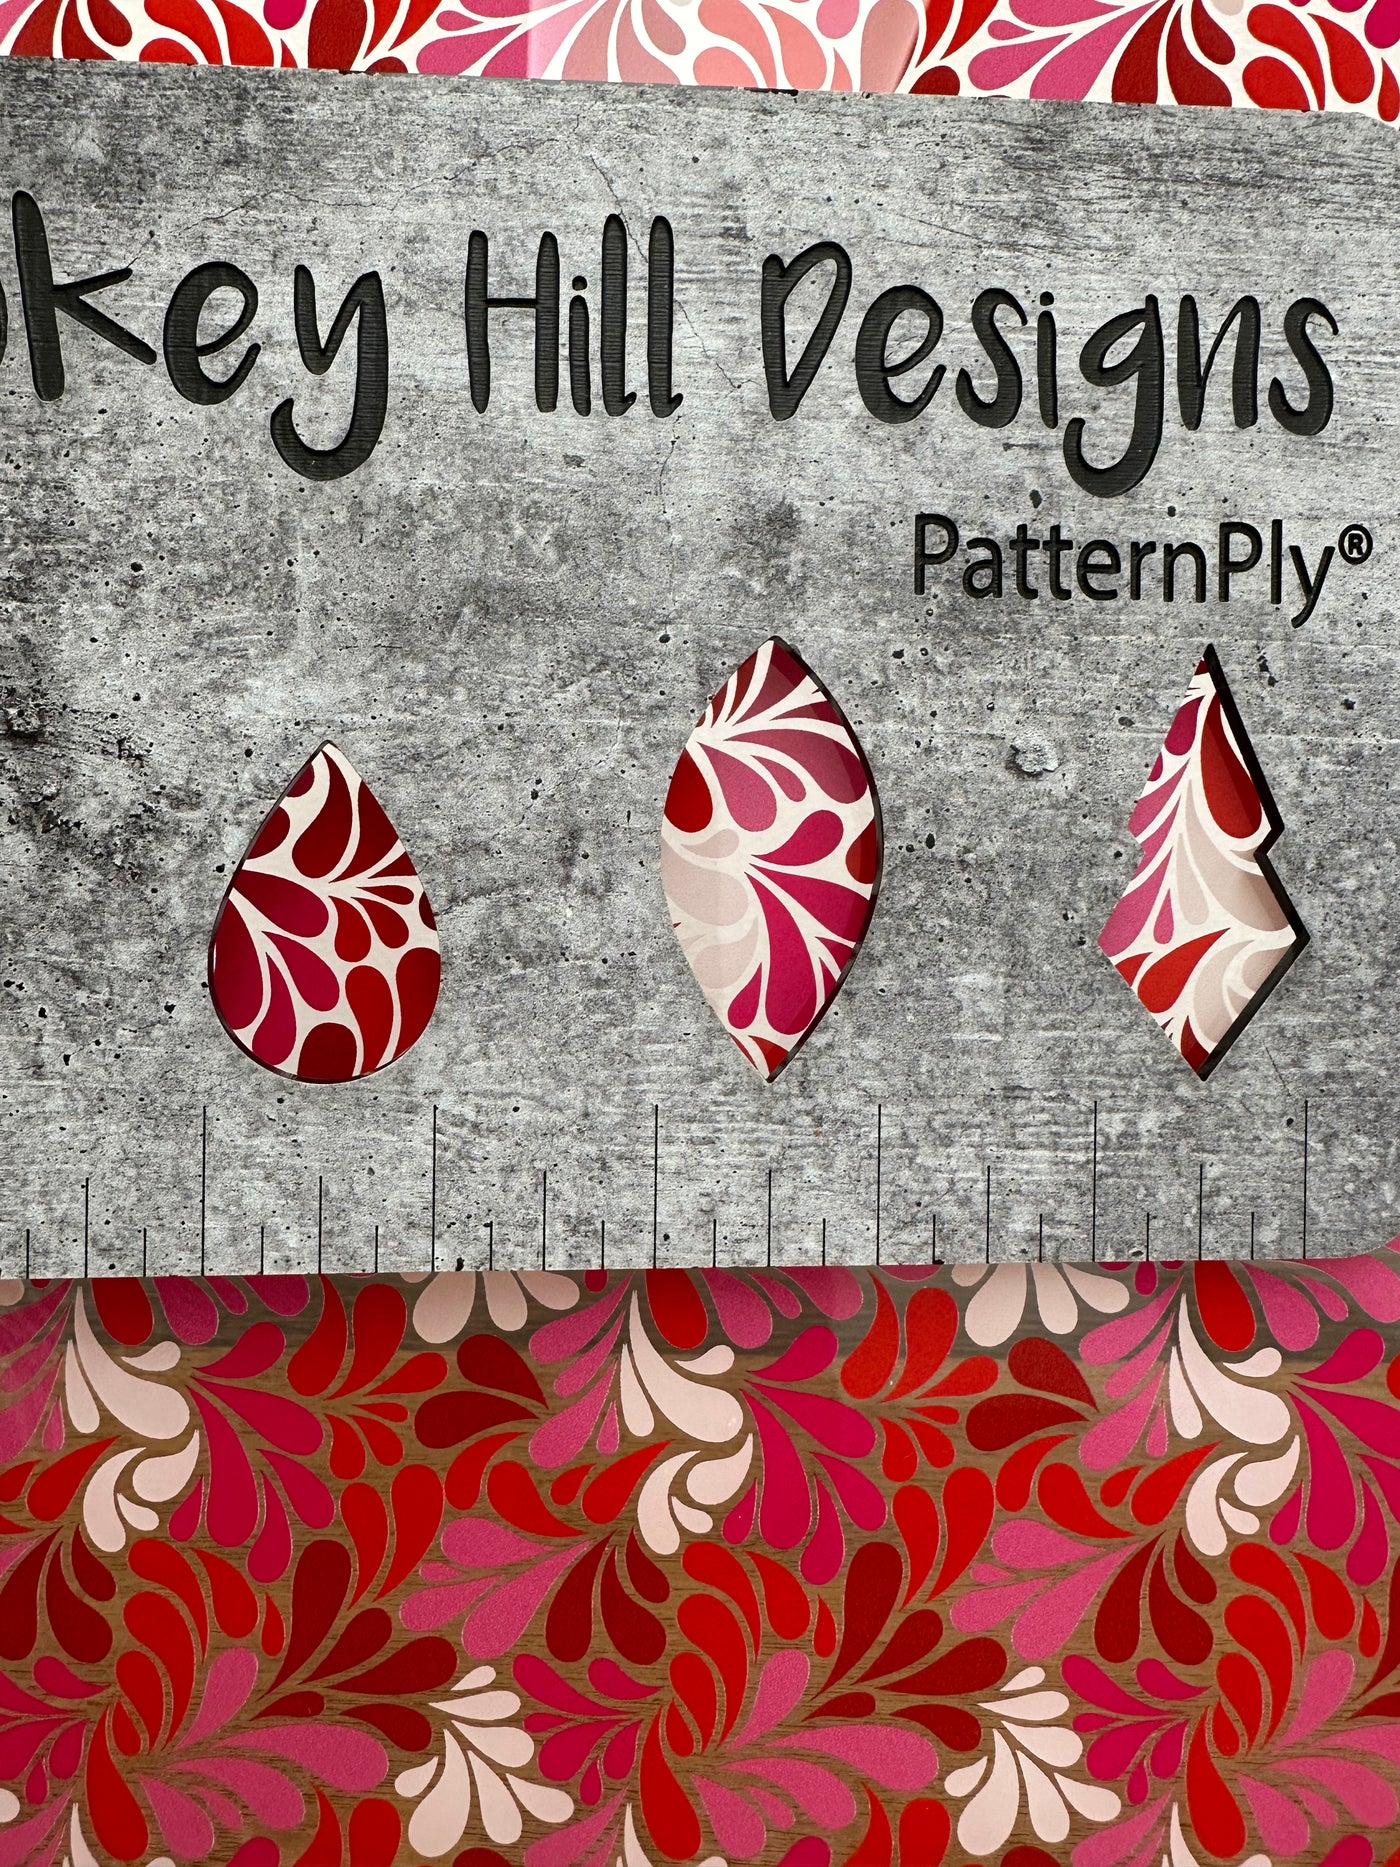 PatternPly® Scattered Red, White, and Pink Petals